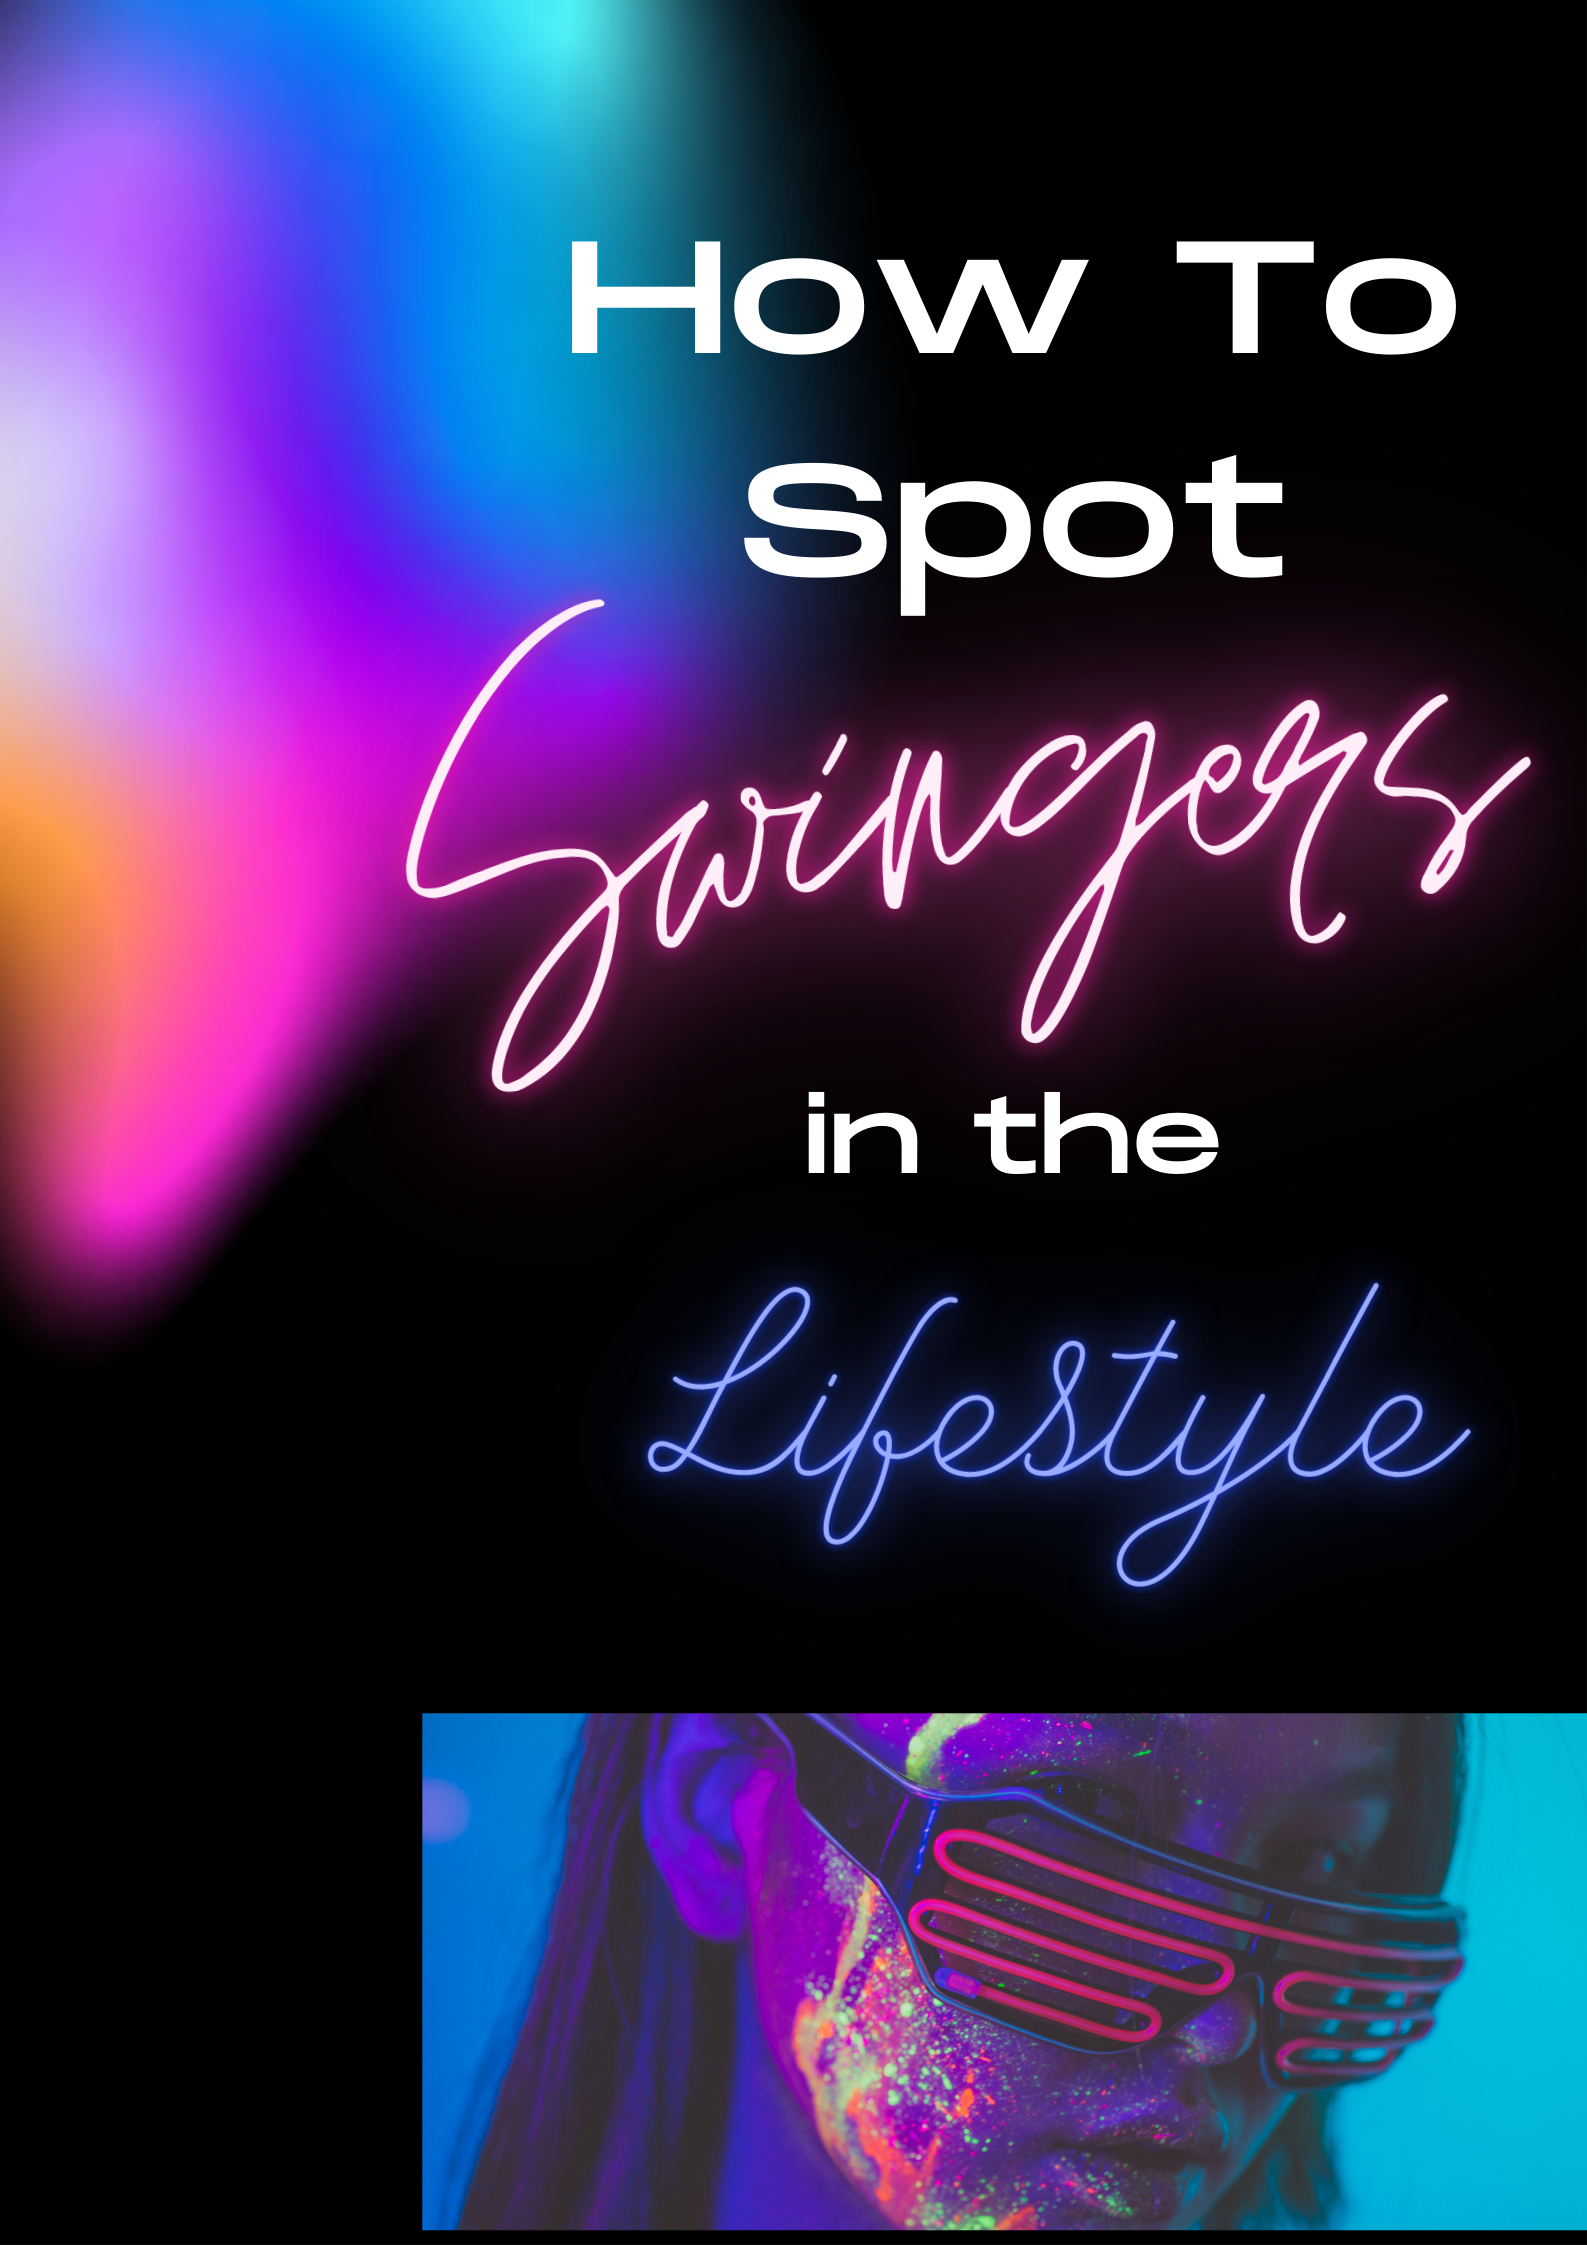 How To Spot Swingers in the Lifestyle